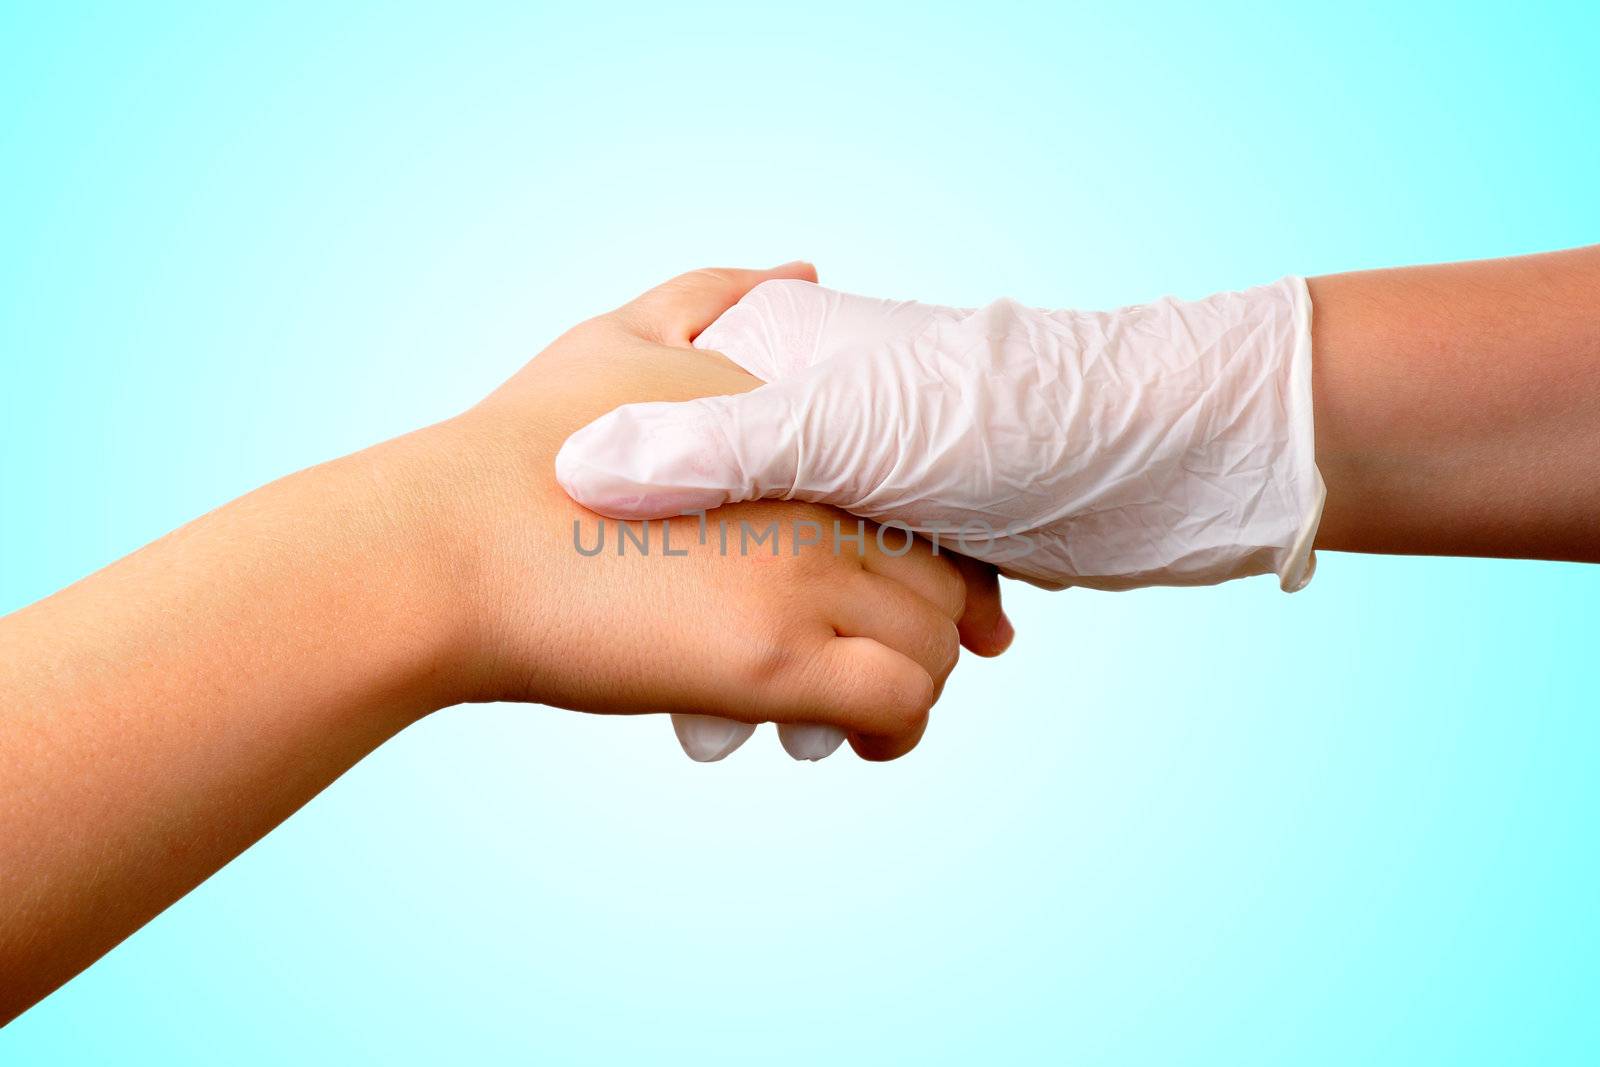 A hand with a medical latex glove holds another hand